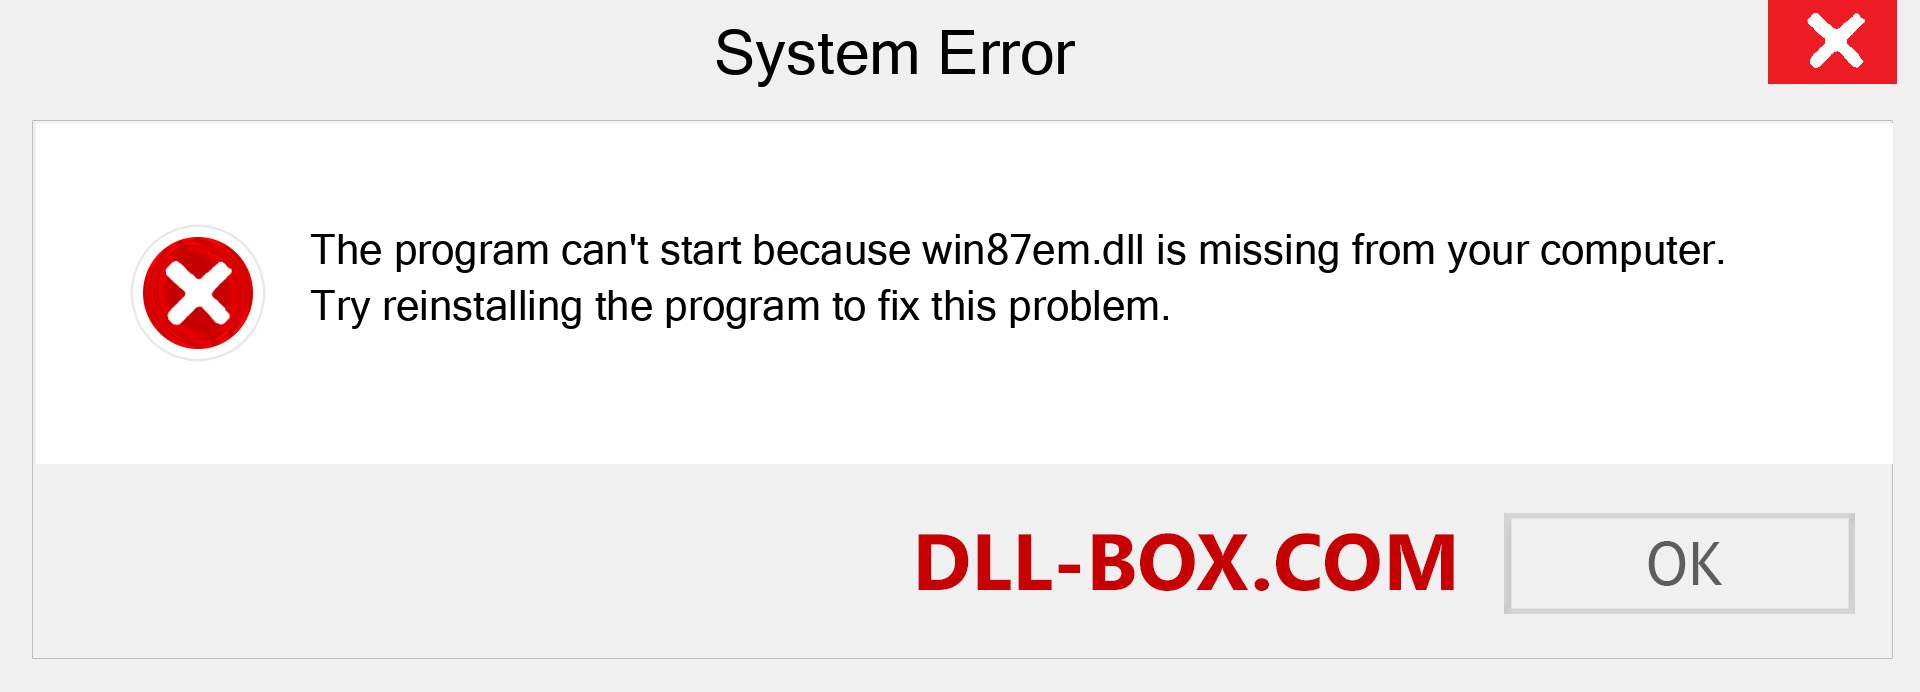  win87em.dll file is missing?. Download for Windows 7, 8, 10 - Fix  win87em dll Missing Error on Windows, photos, images